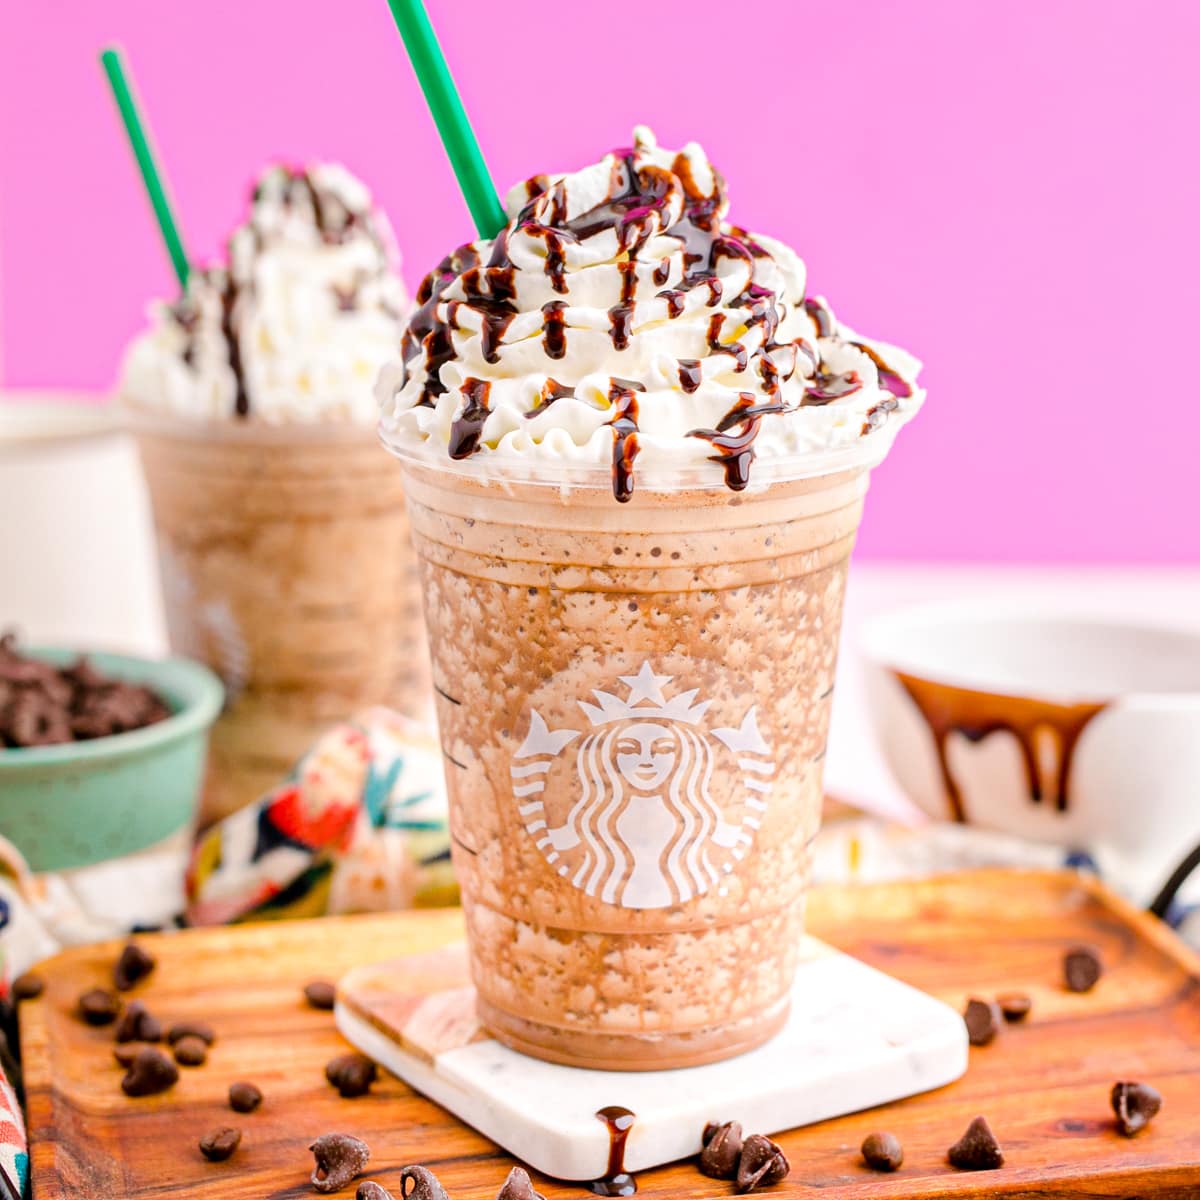 Java chip frappuccino in a Starbucks cup with whipped cream and drizzled chocolate sauce.